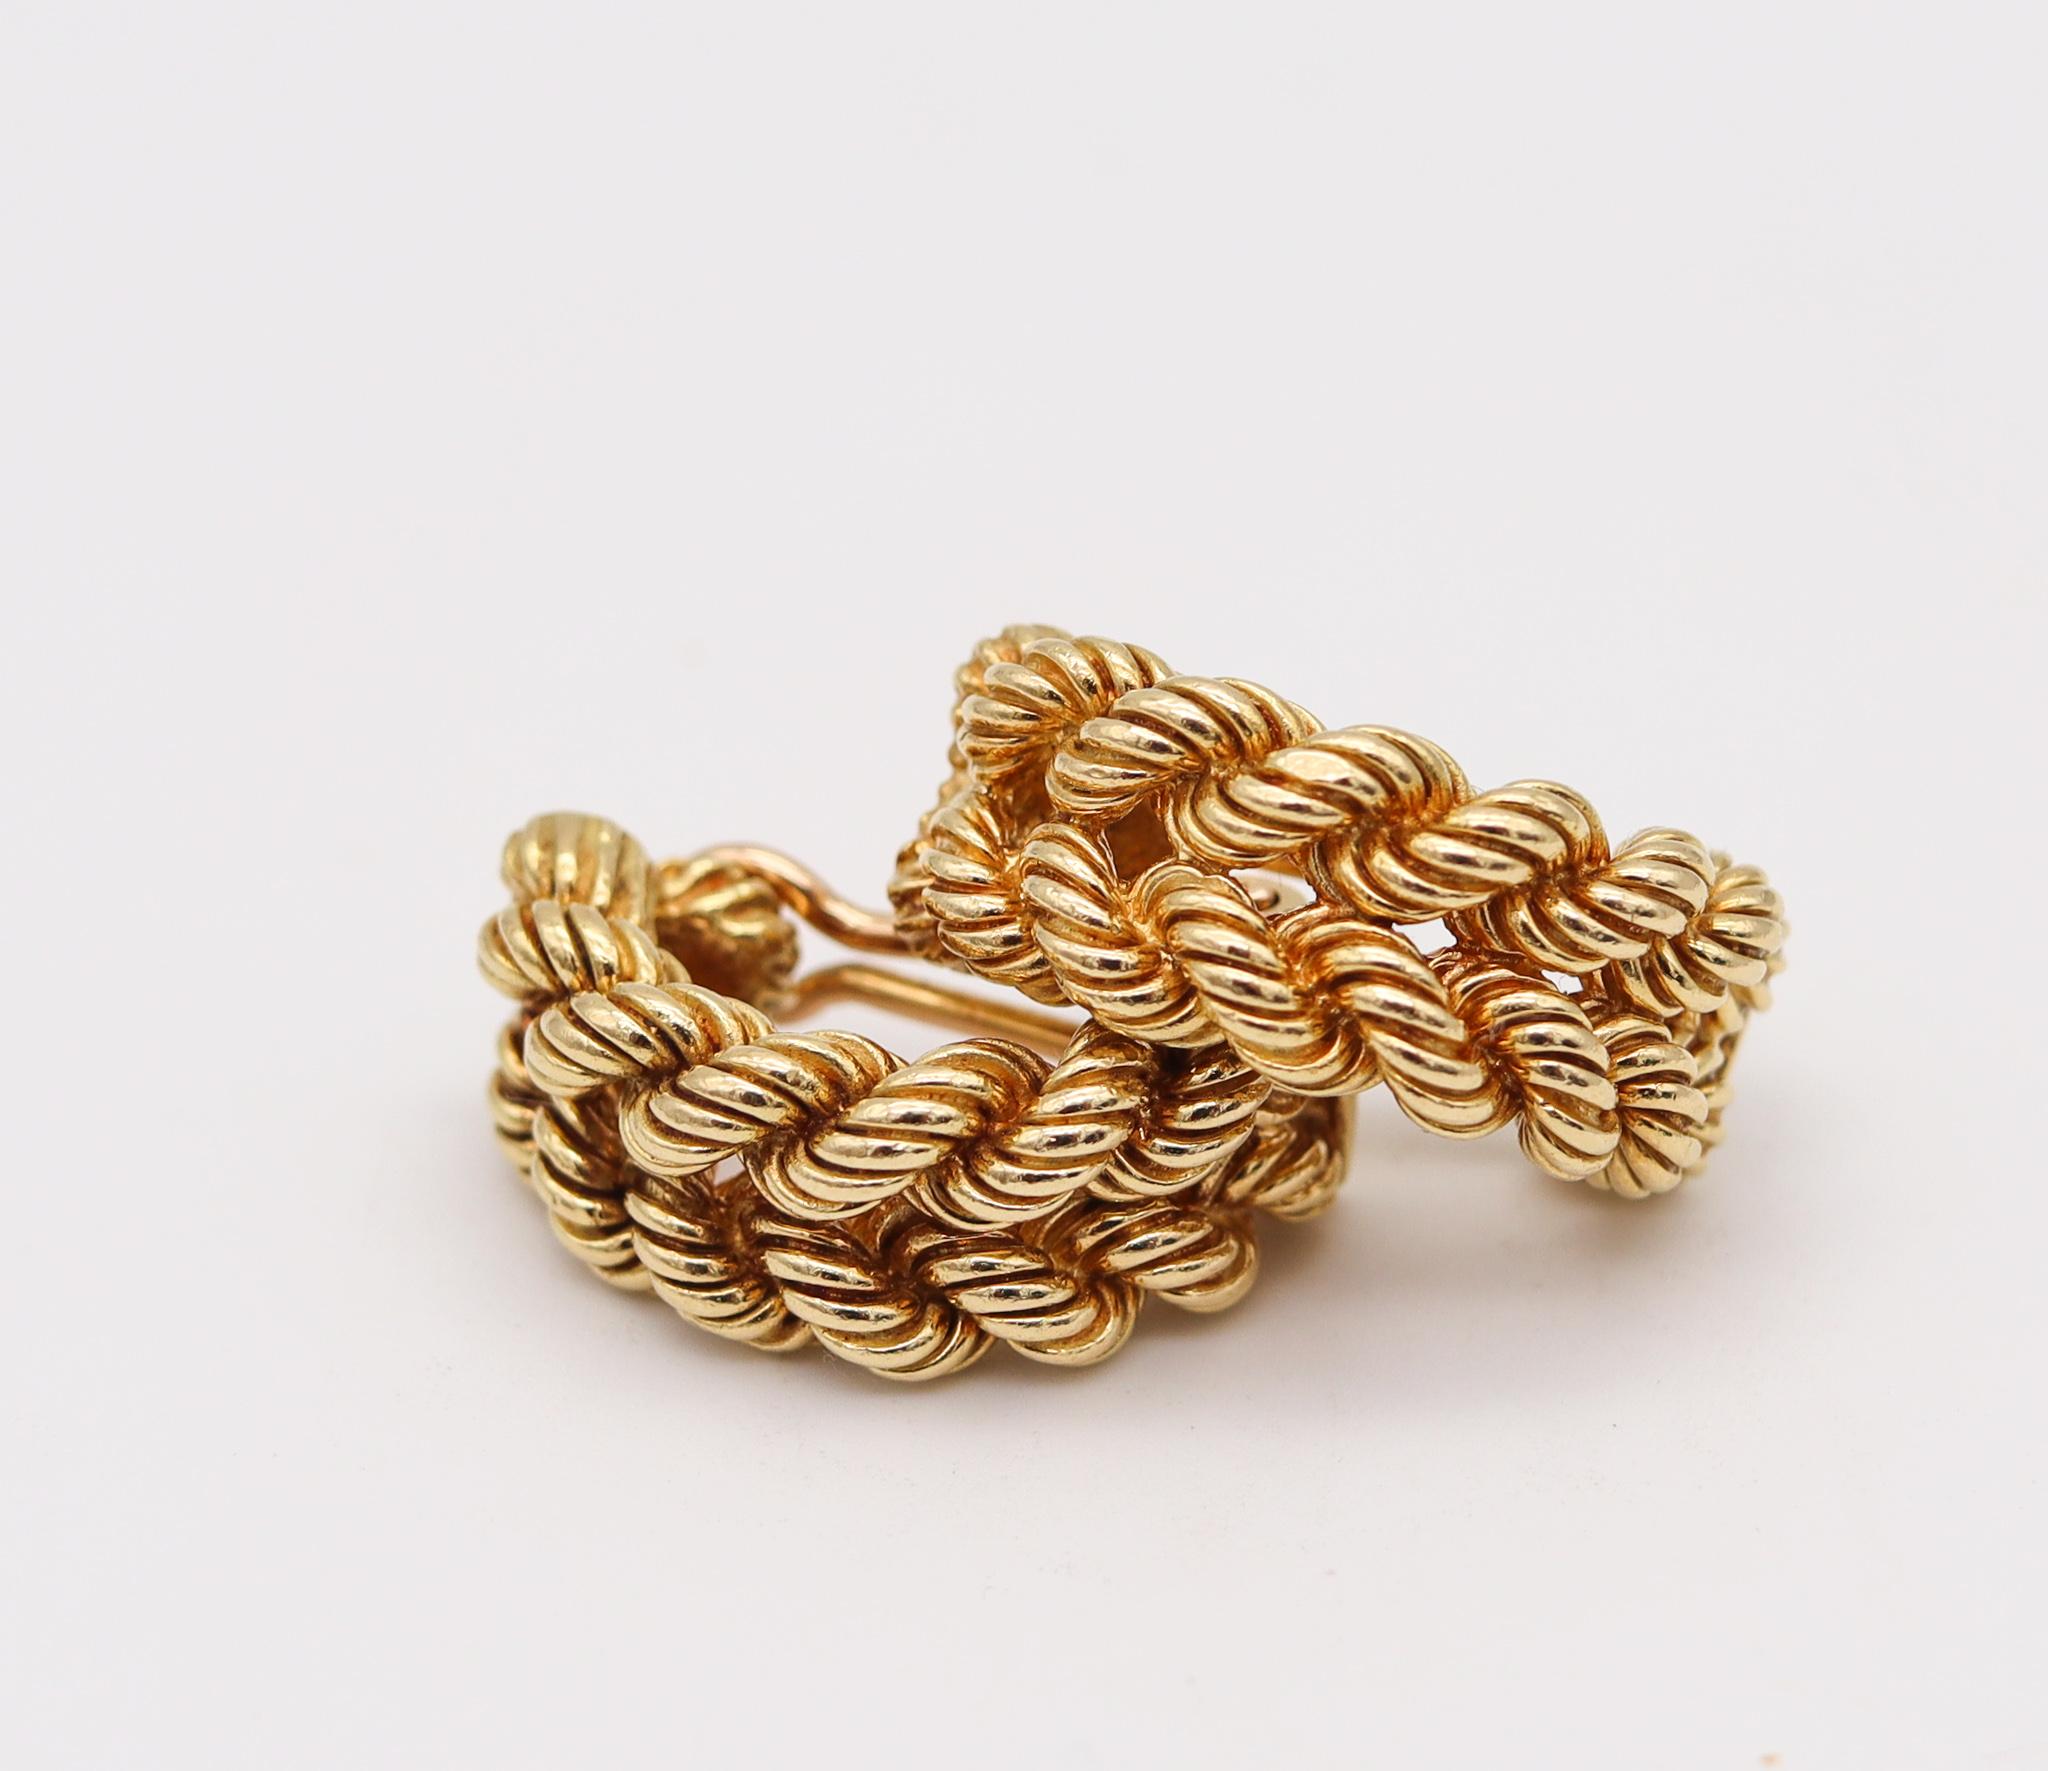 Modernist Hermes Paris 1970 Twisted Wires Clips on Earrings in Solid 18kt Yellow Gold For Sale